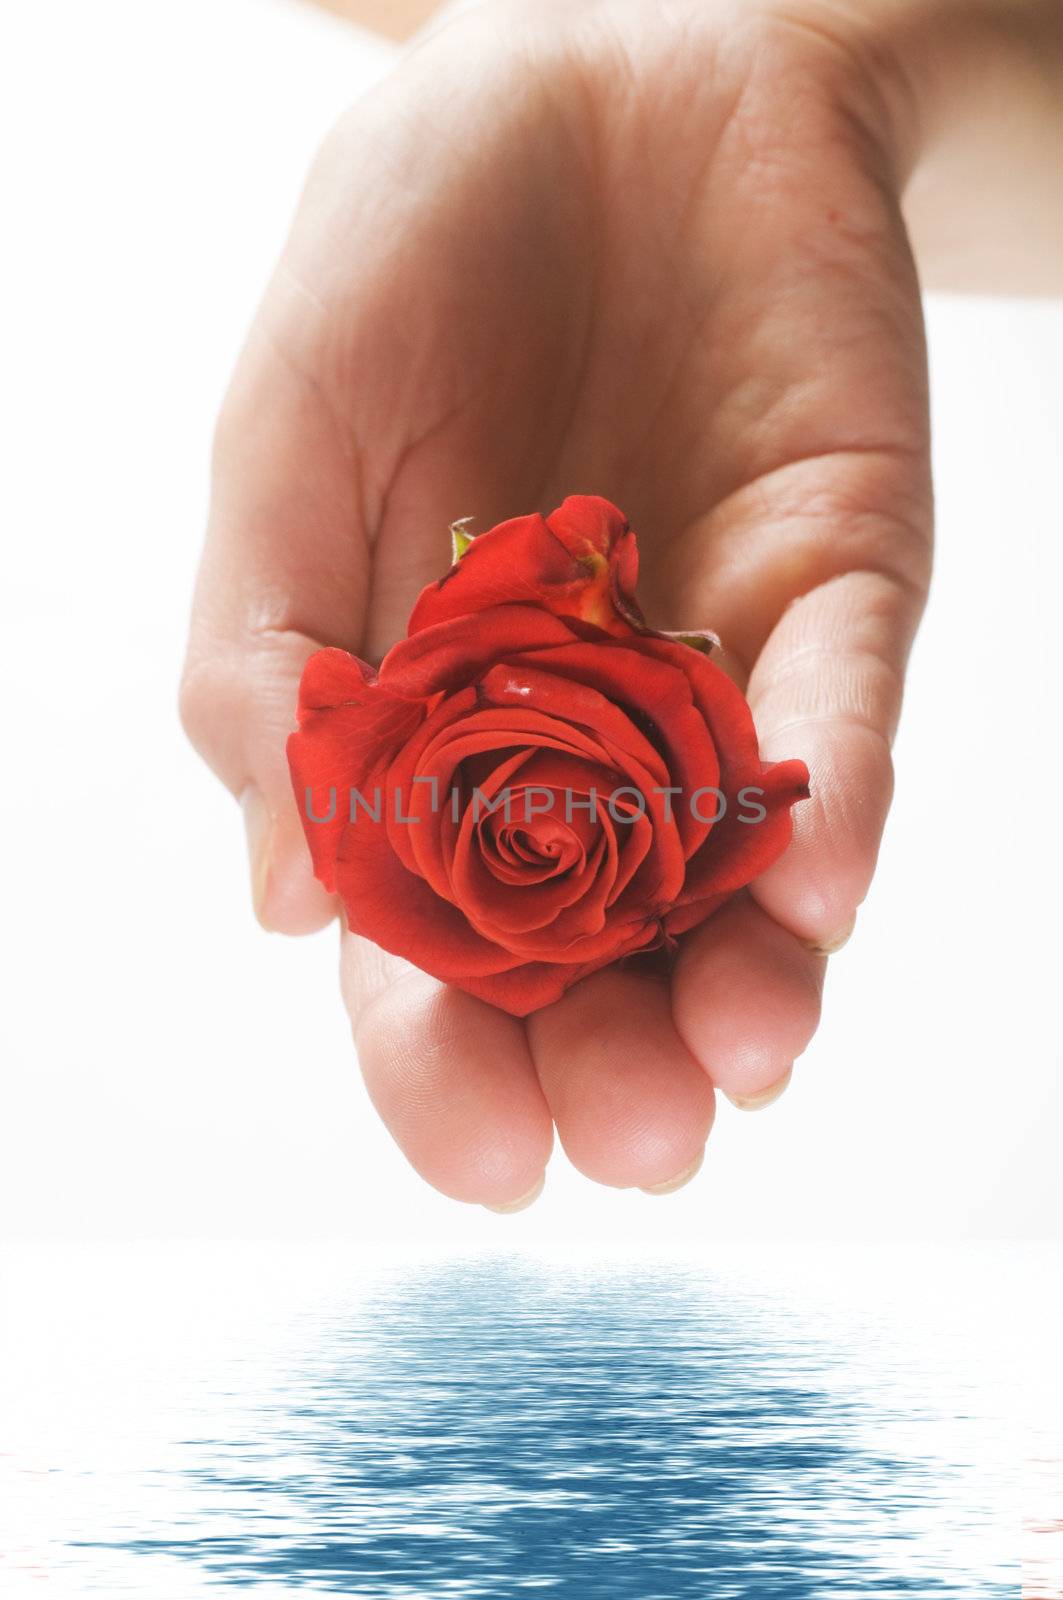 Red rose lying in a female palm. Conceptual, isolated on white with water reflection